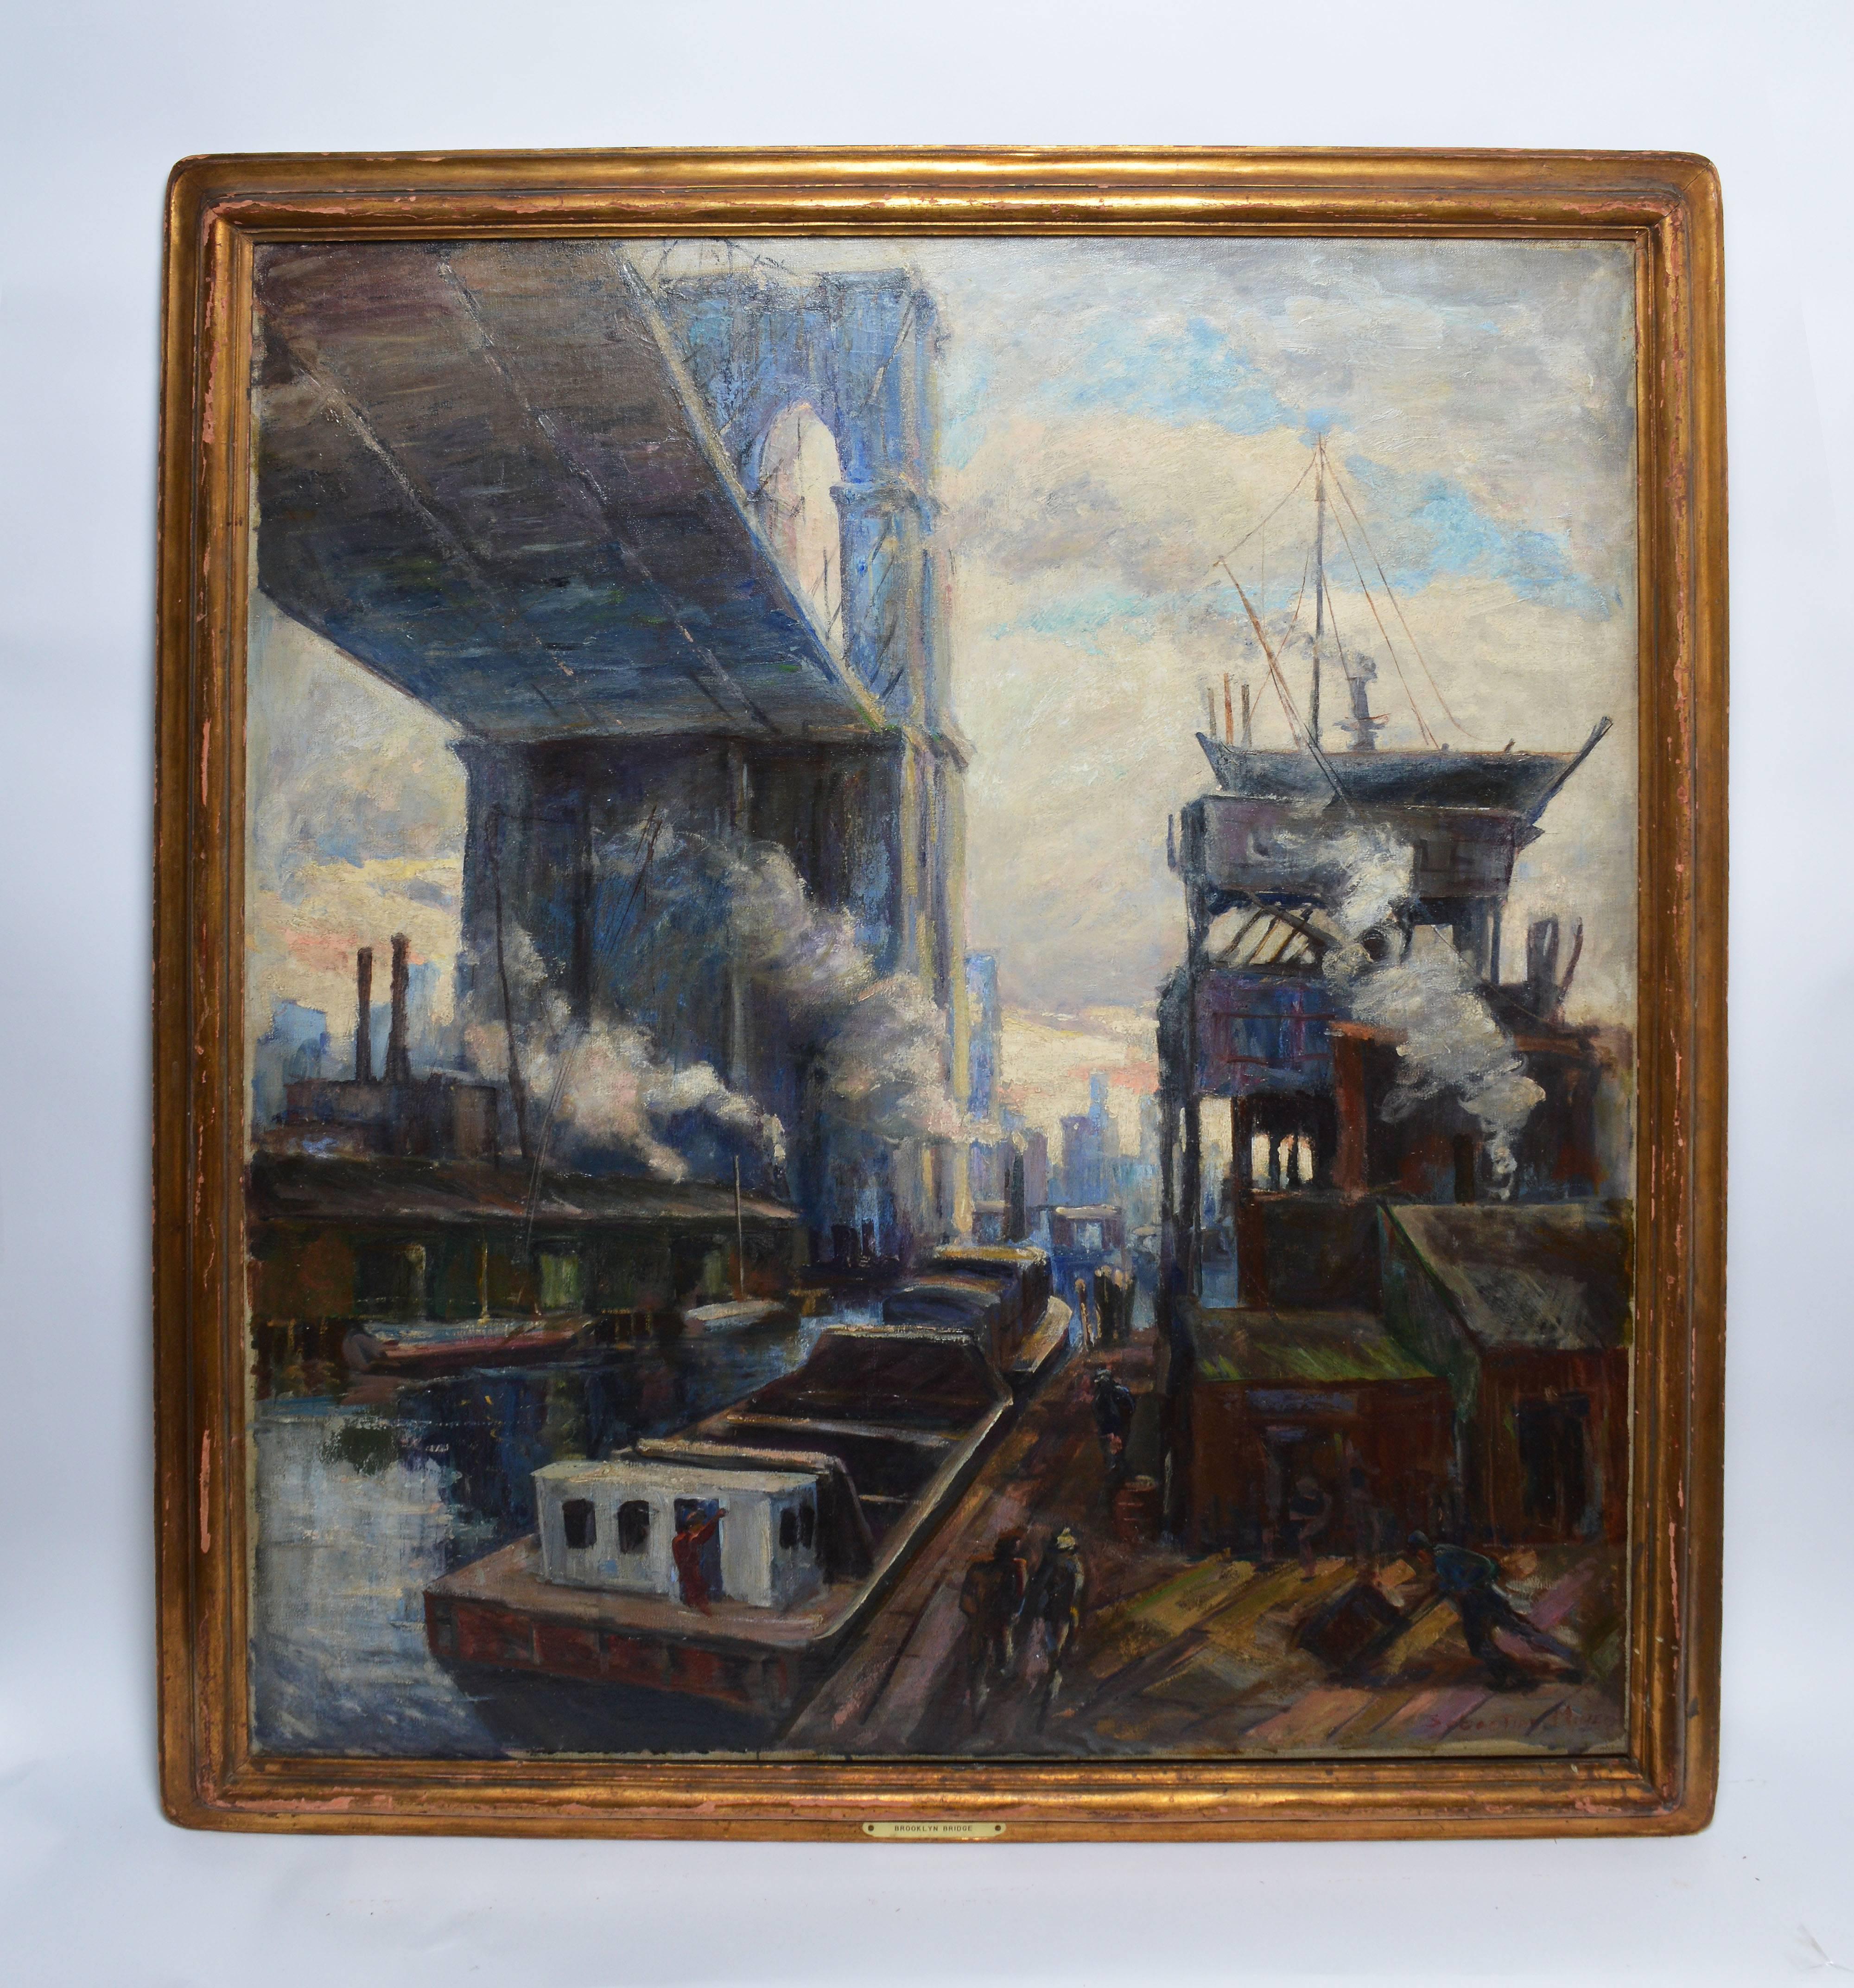 View from Under the Brooklyn Bridge - Painting by Sebastian Mineo